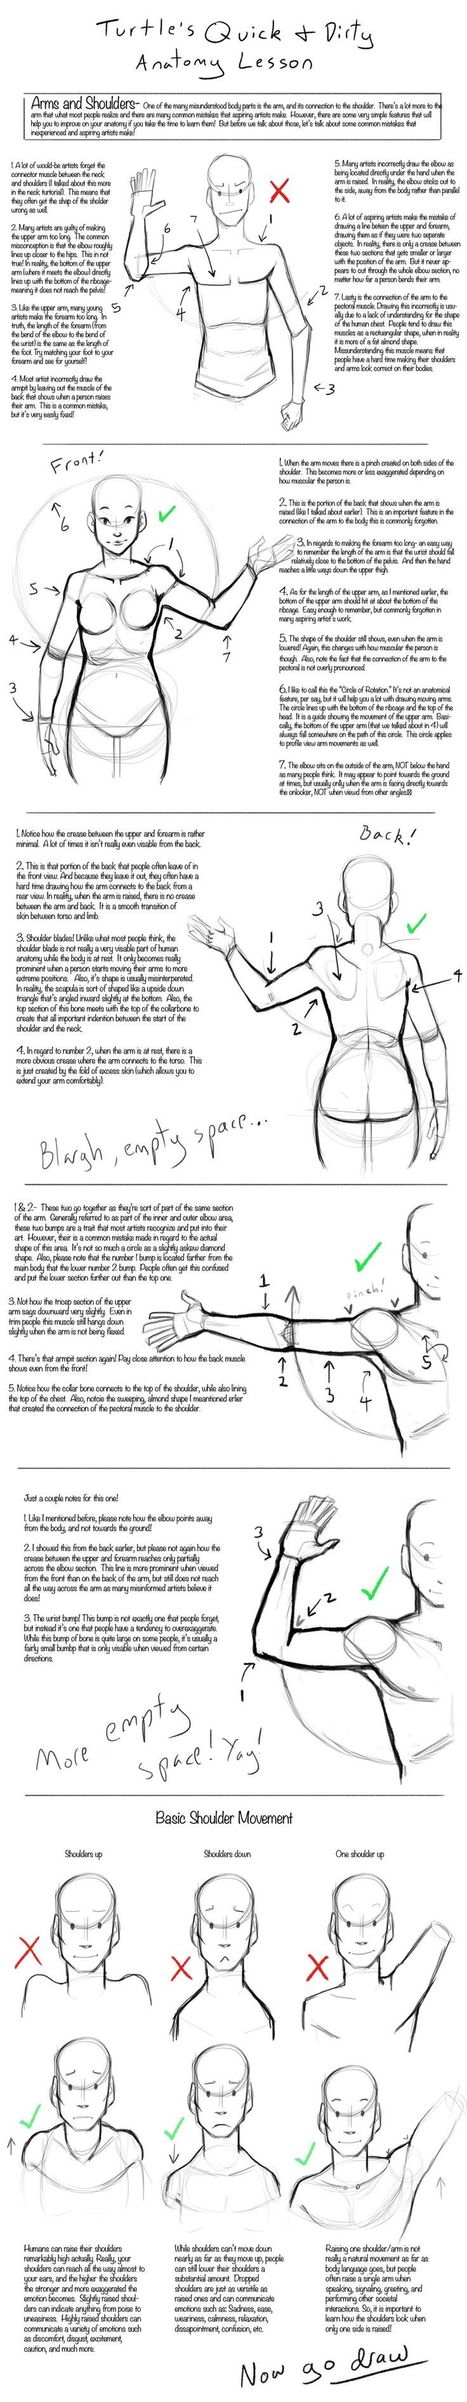 Anatomy Drawing Lesson | Drawing References and Resources | Scoop.it